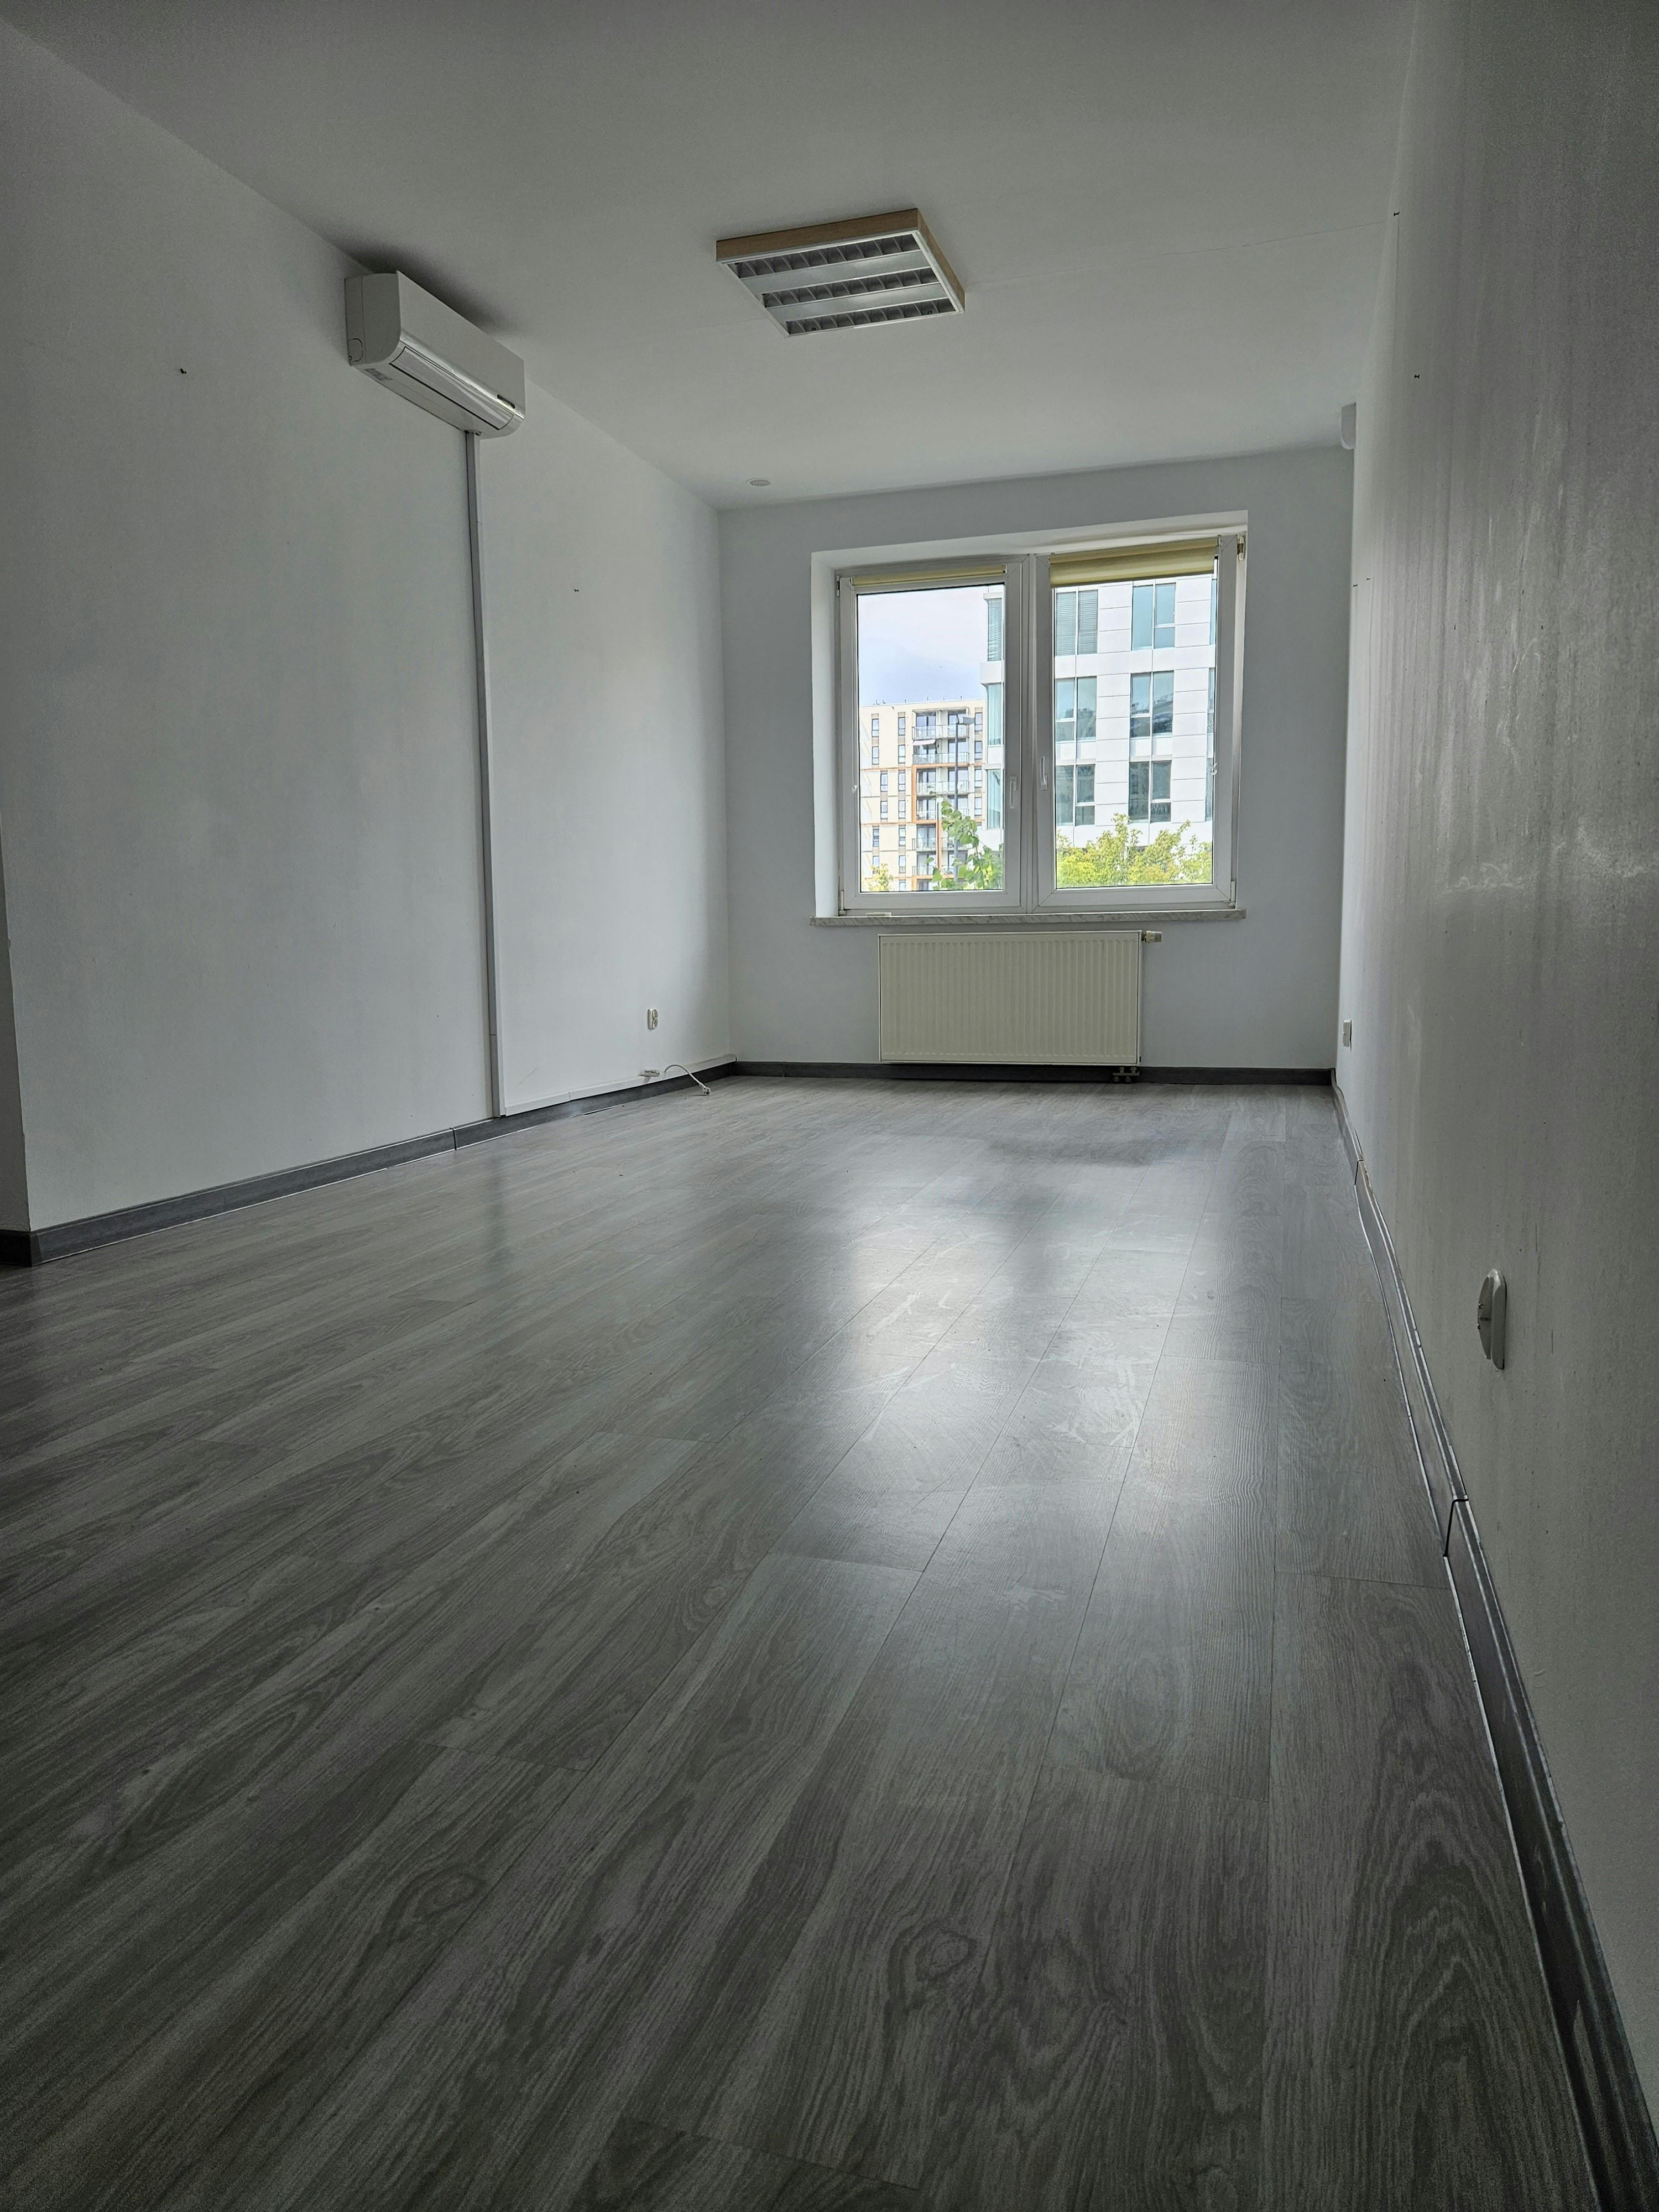 Offices for rent in Offices Domaniewska 47 #3